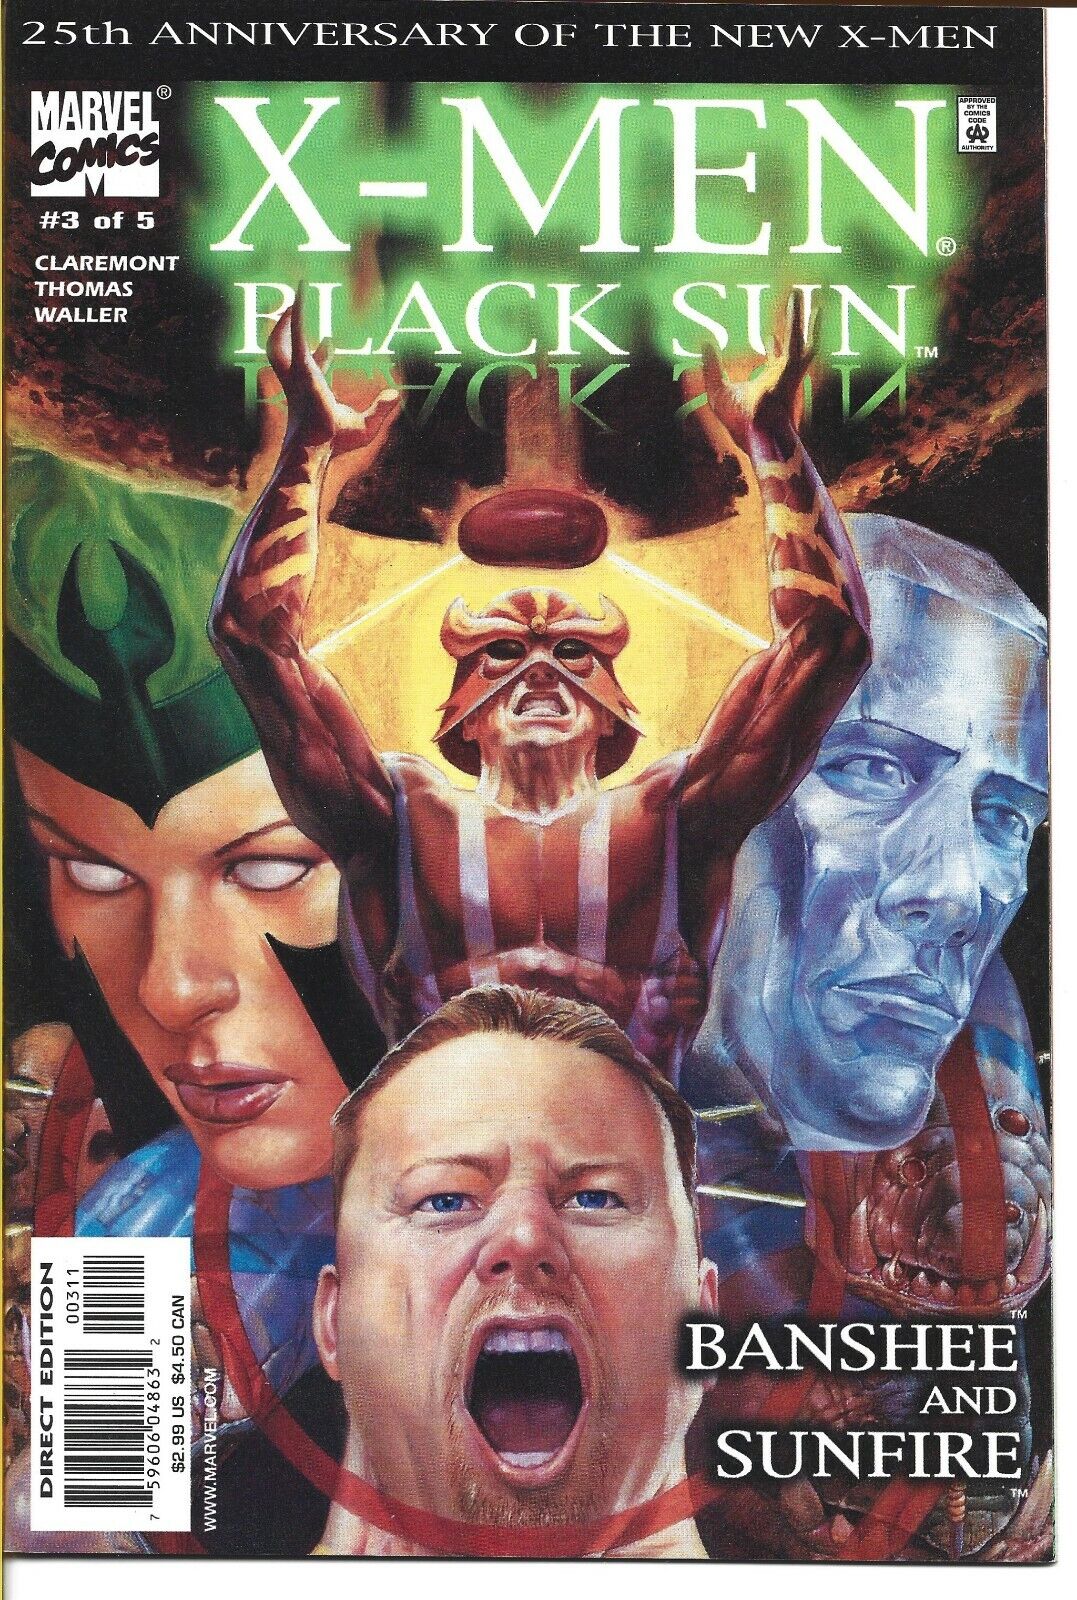 X-MEN BLACK SUN #3 MARVEL COMICS 2000 BAGGED AND BOARDED